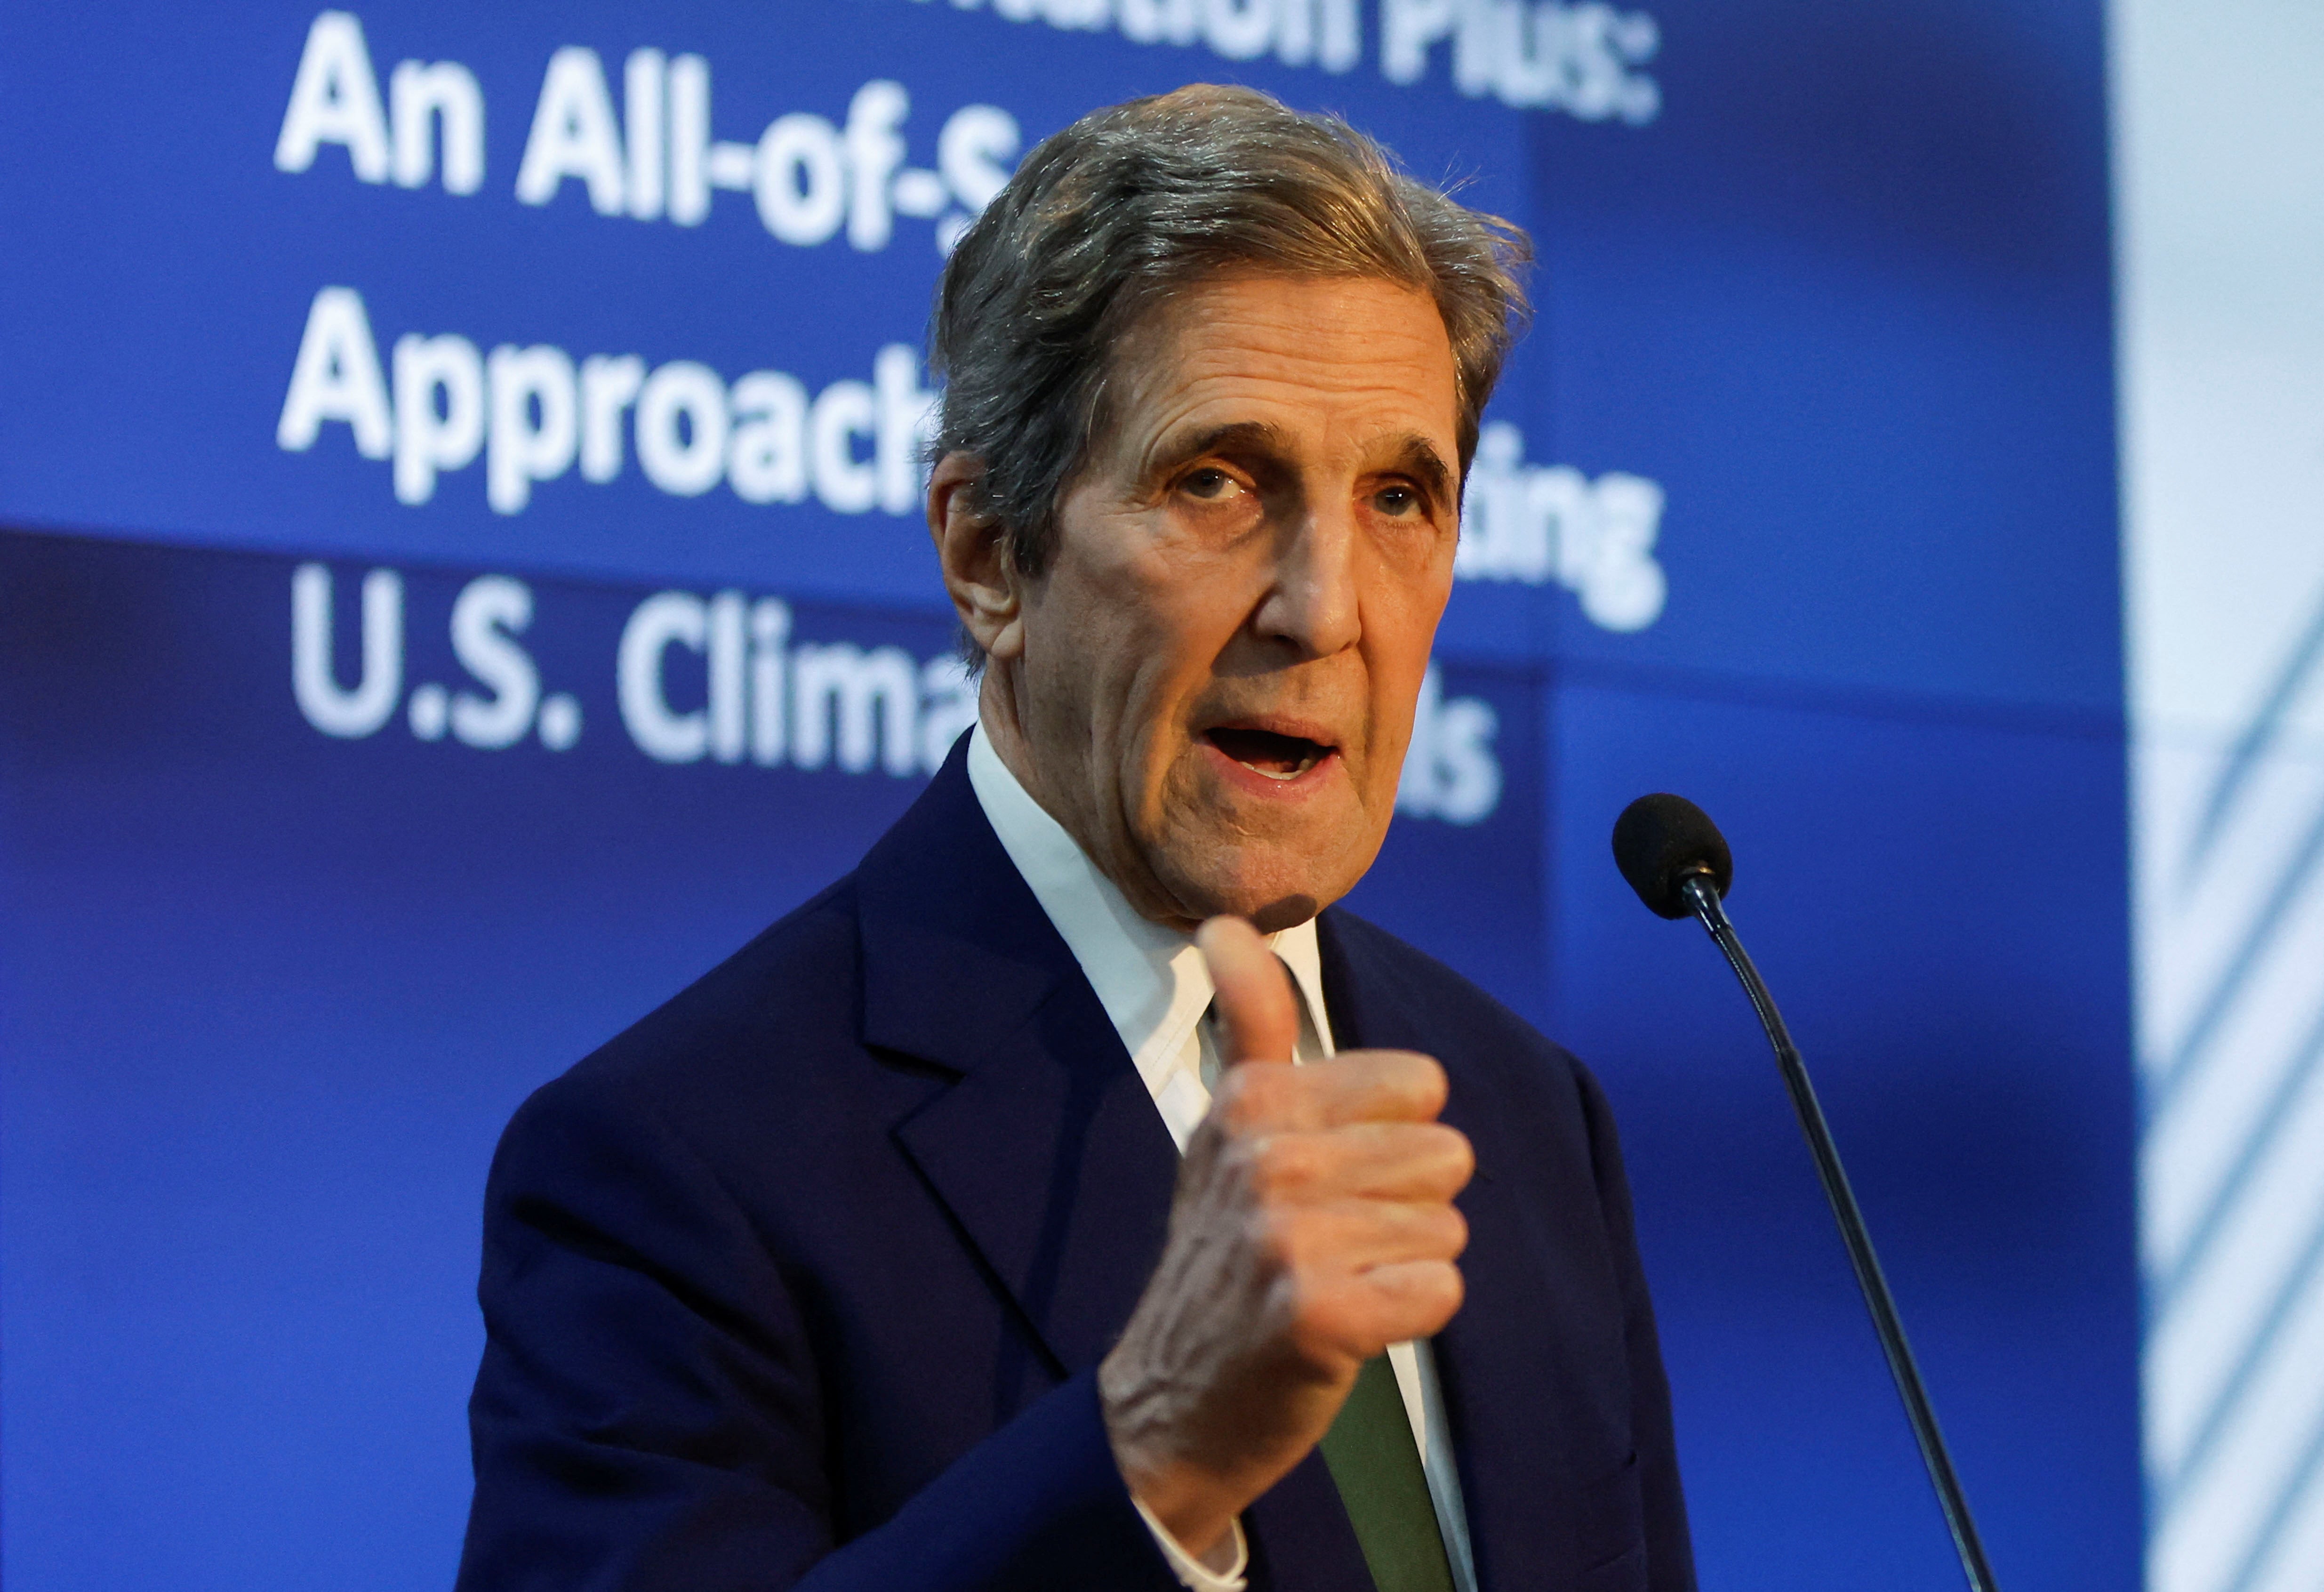 John Kerry said the world needed to limit rising global temperatures and accelerate adaptation plans.